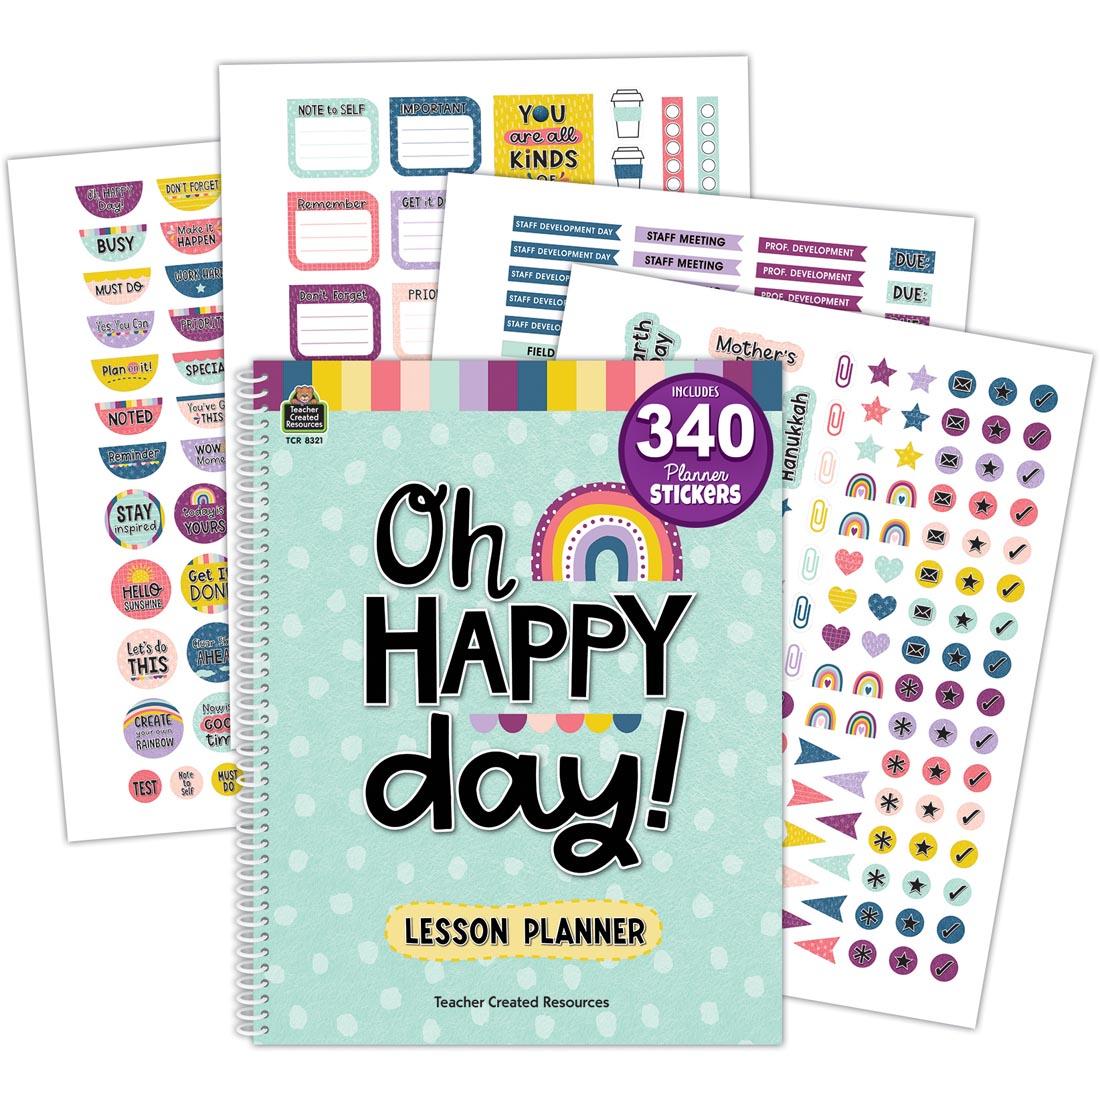 Lesson Planner from the Oh Happy Day collection by Teacher Created Resources